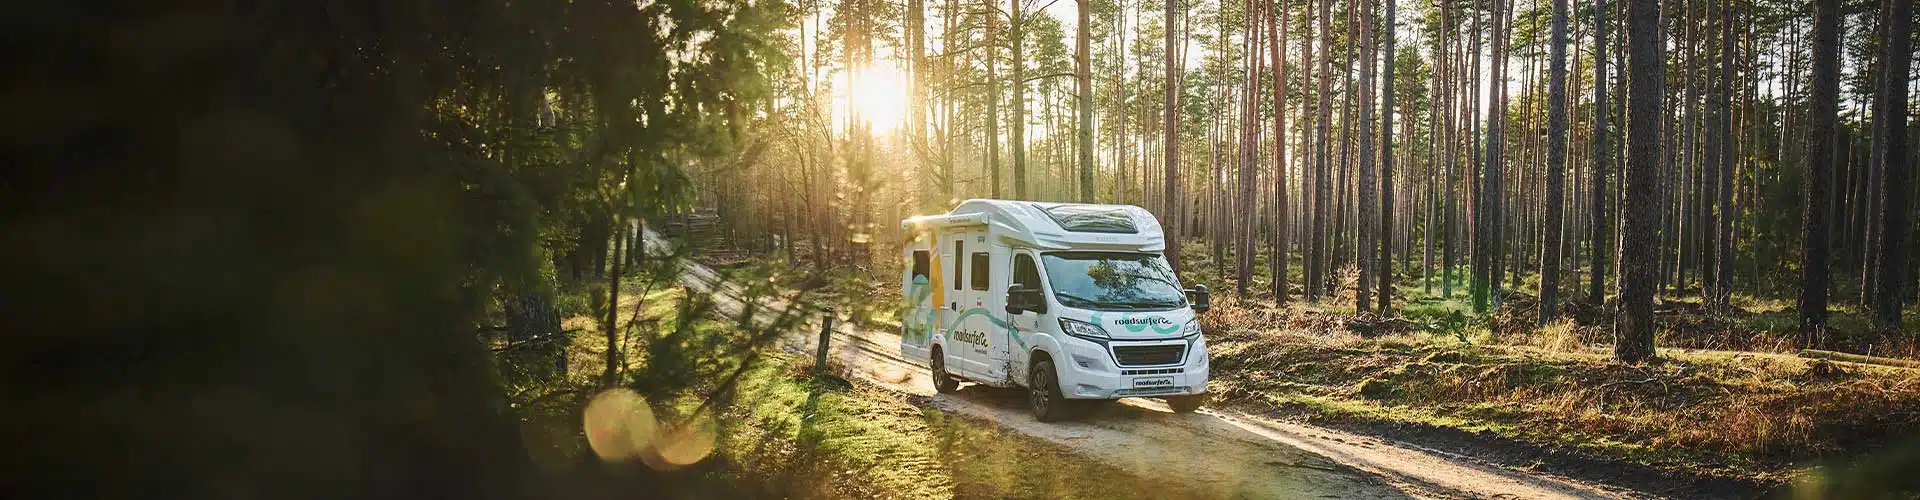 roadsurfer RV in a sunny forest